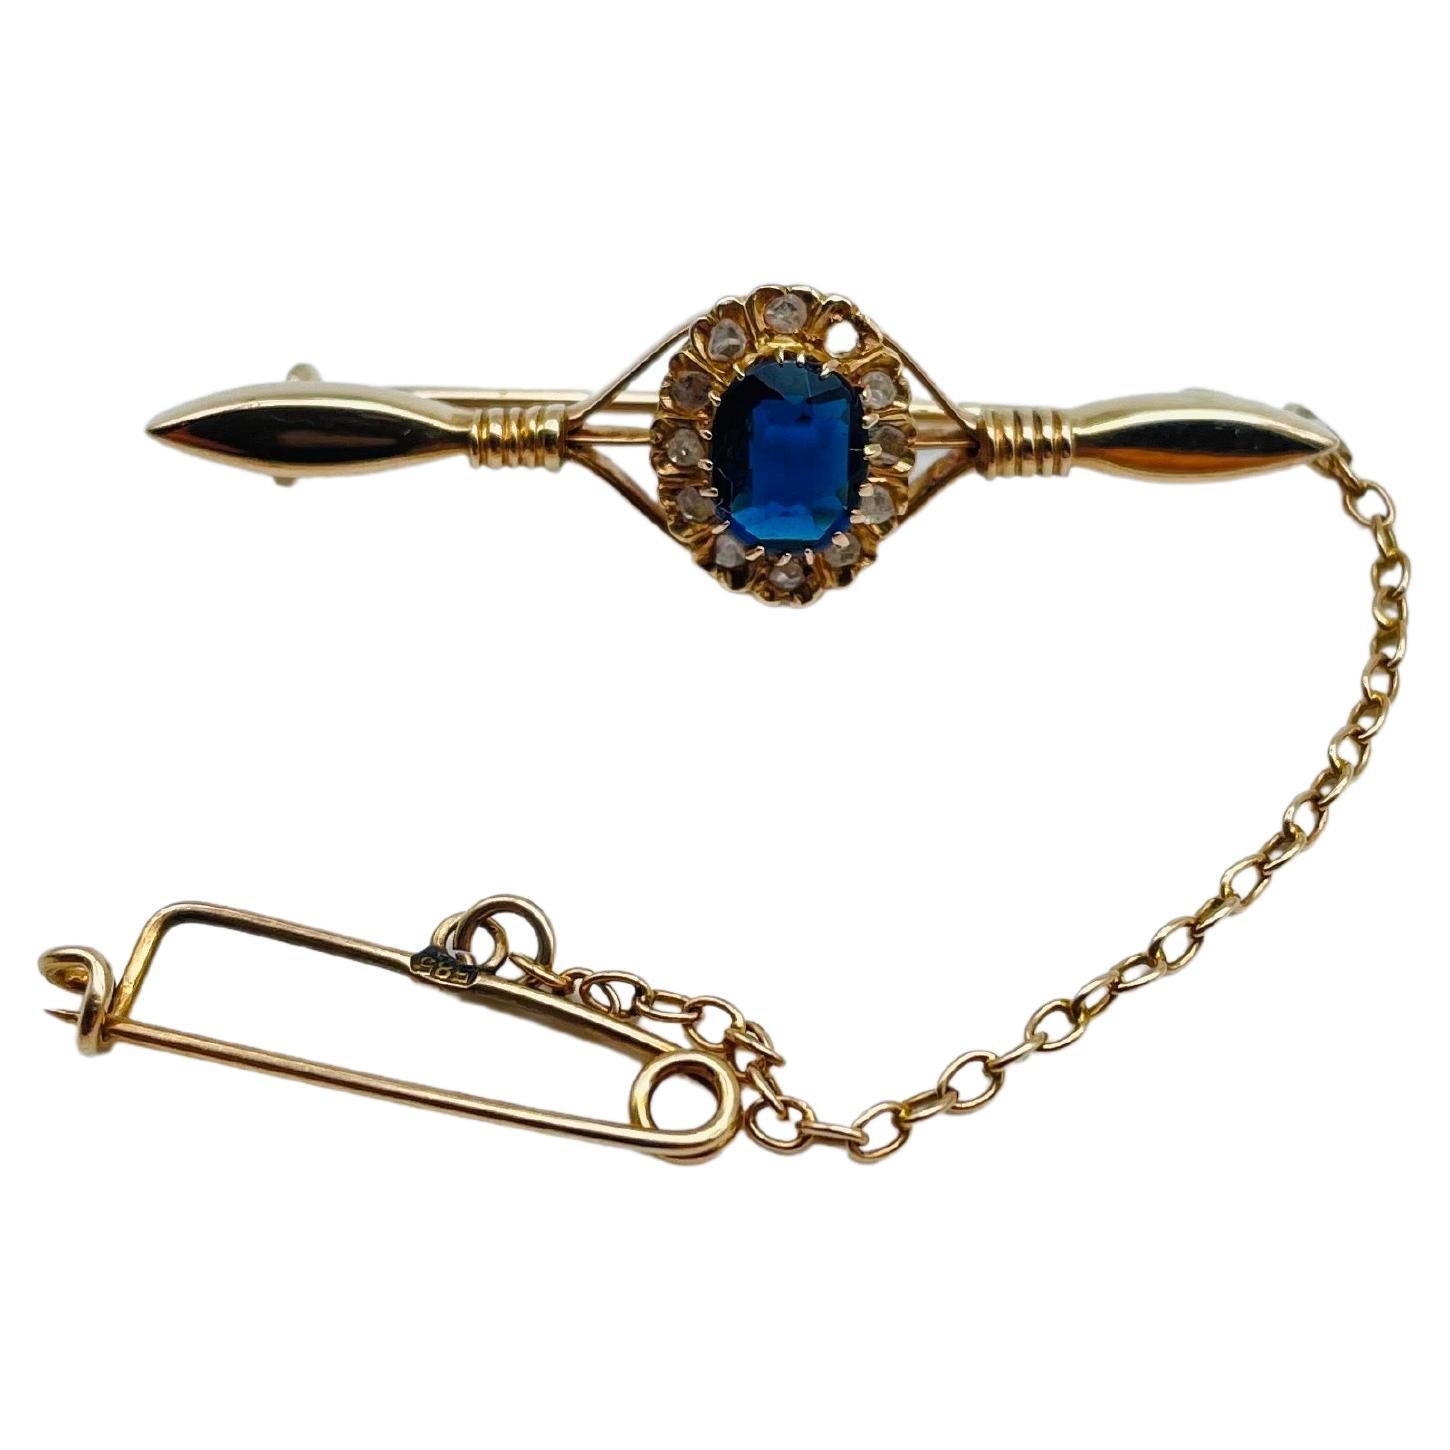 Antique 14k gold bar brooch with diamonds and tanzanite